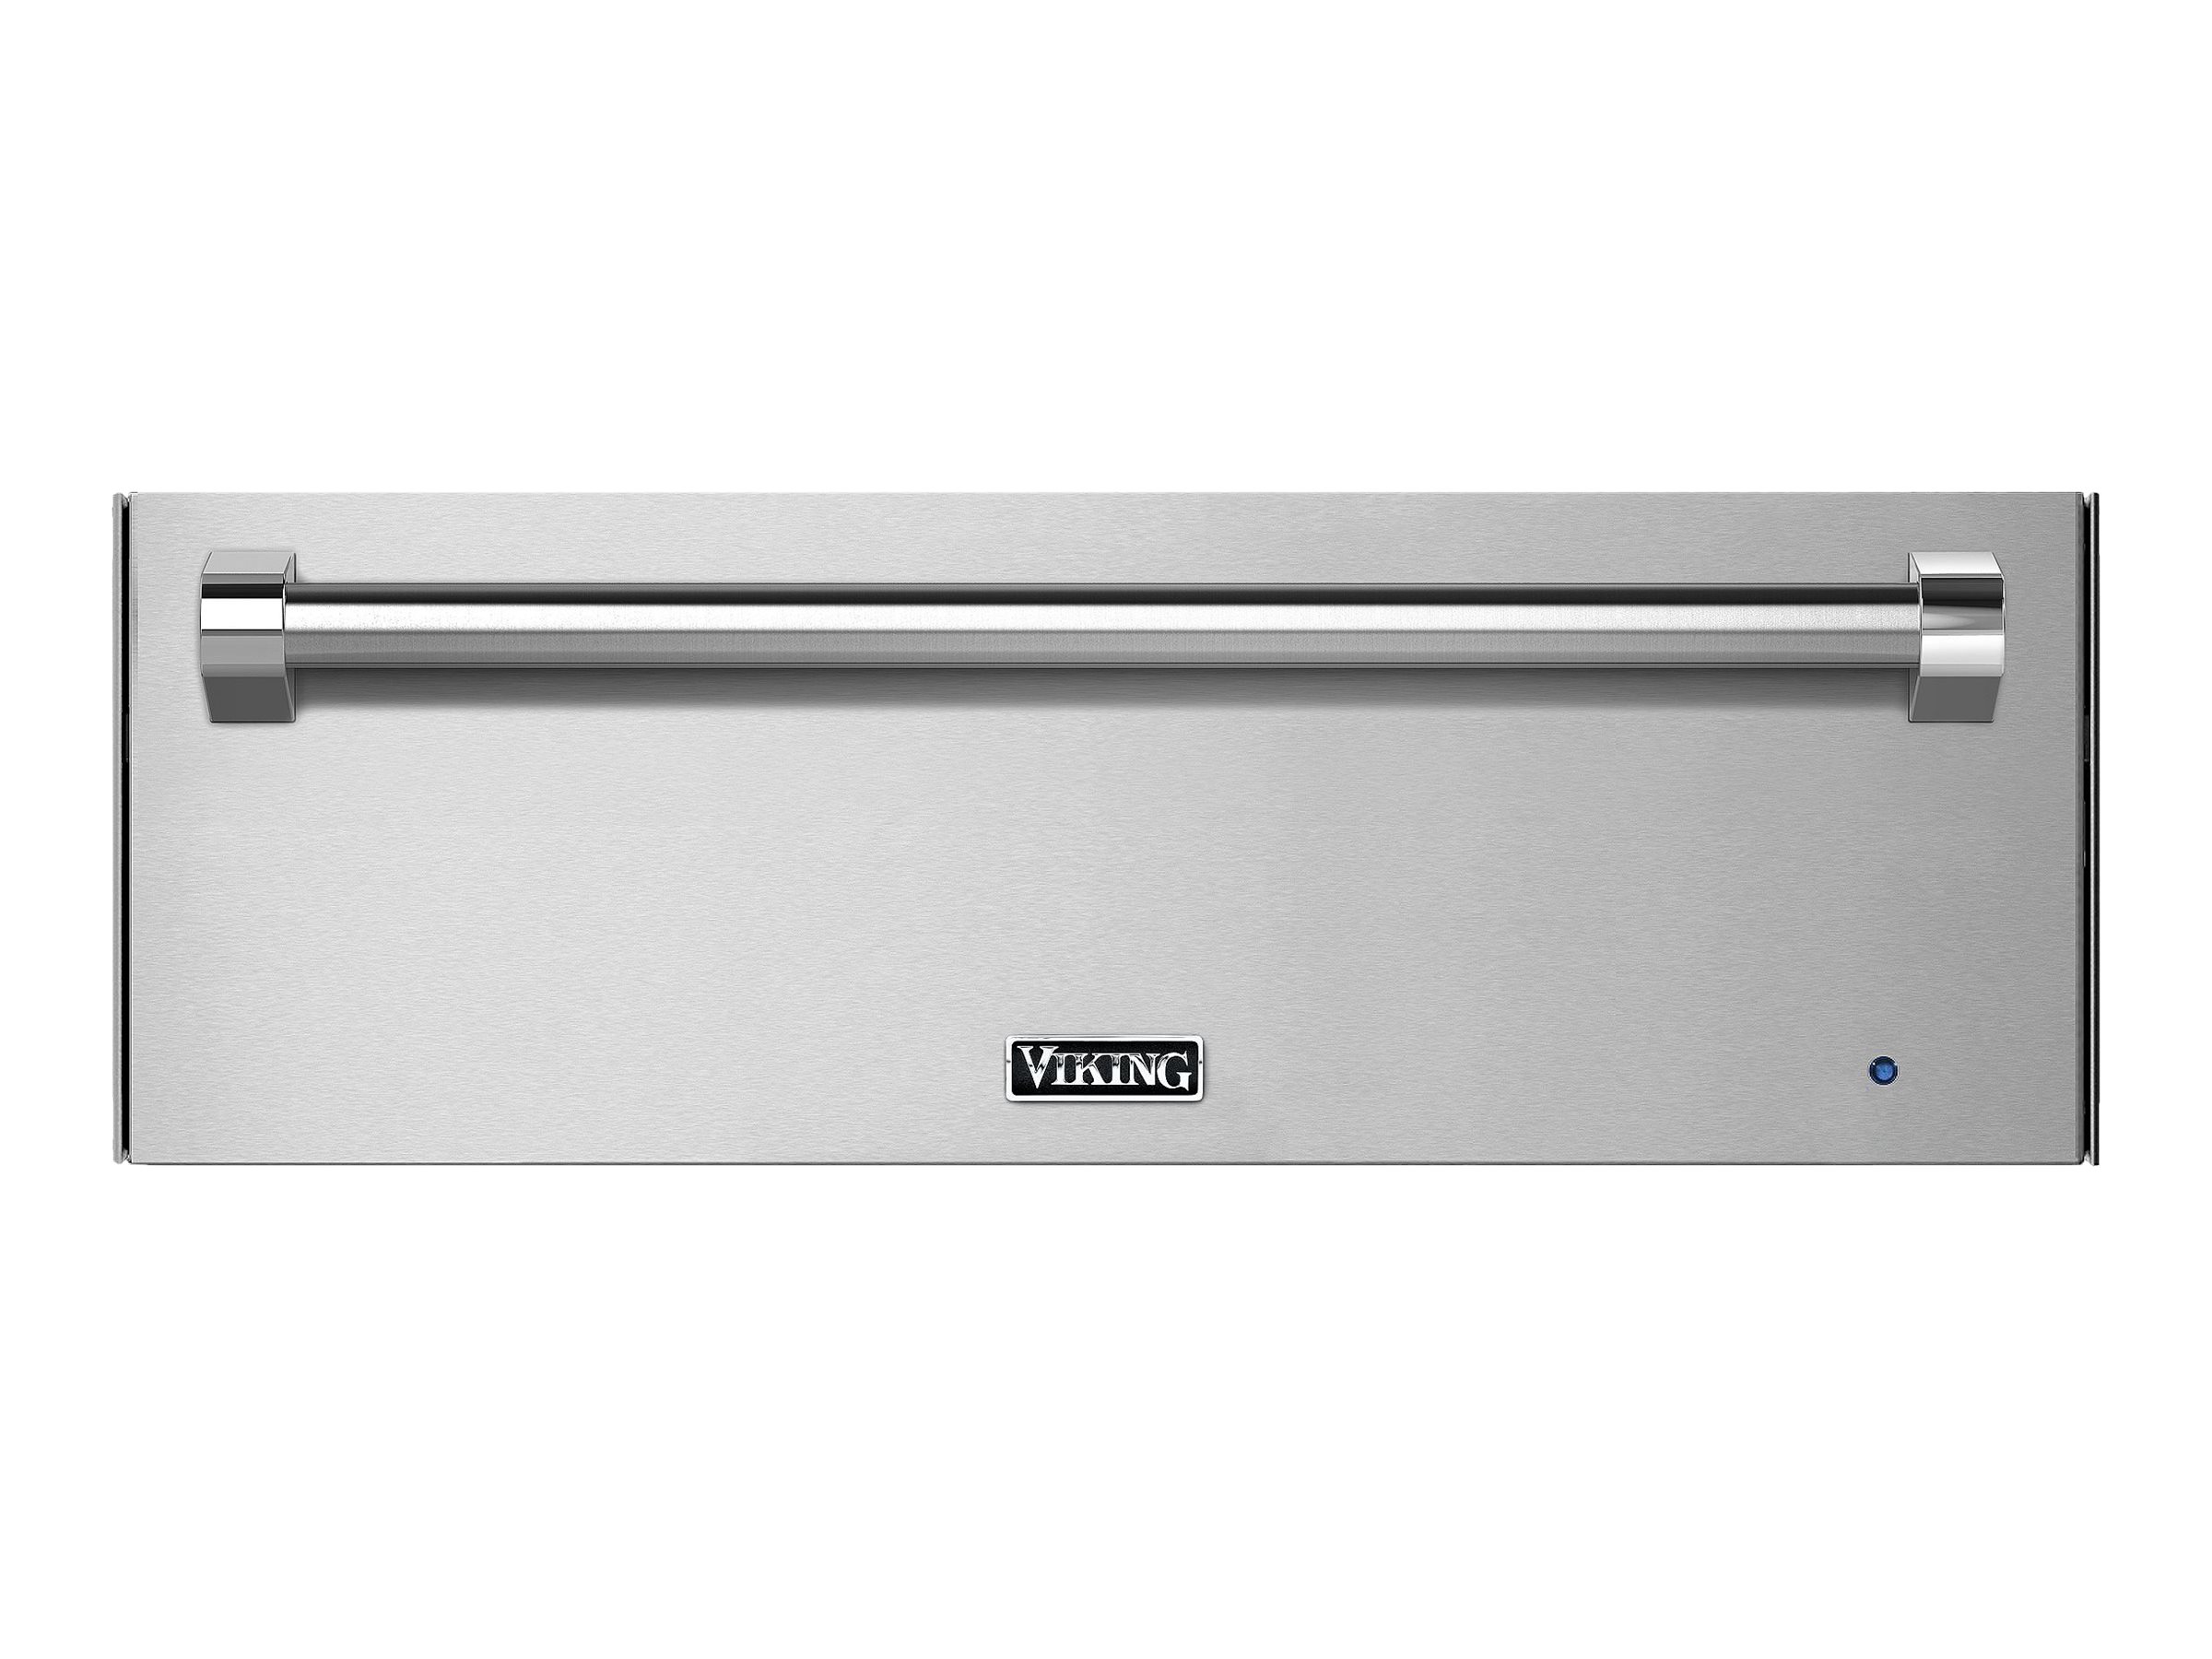 Viking RVEWD330SS - Warming drawer - built-in - niche - width: 28.3 in - depth: 23.5 in - height: 9.3 in - stainless steel - image 1 of 7